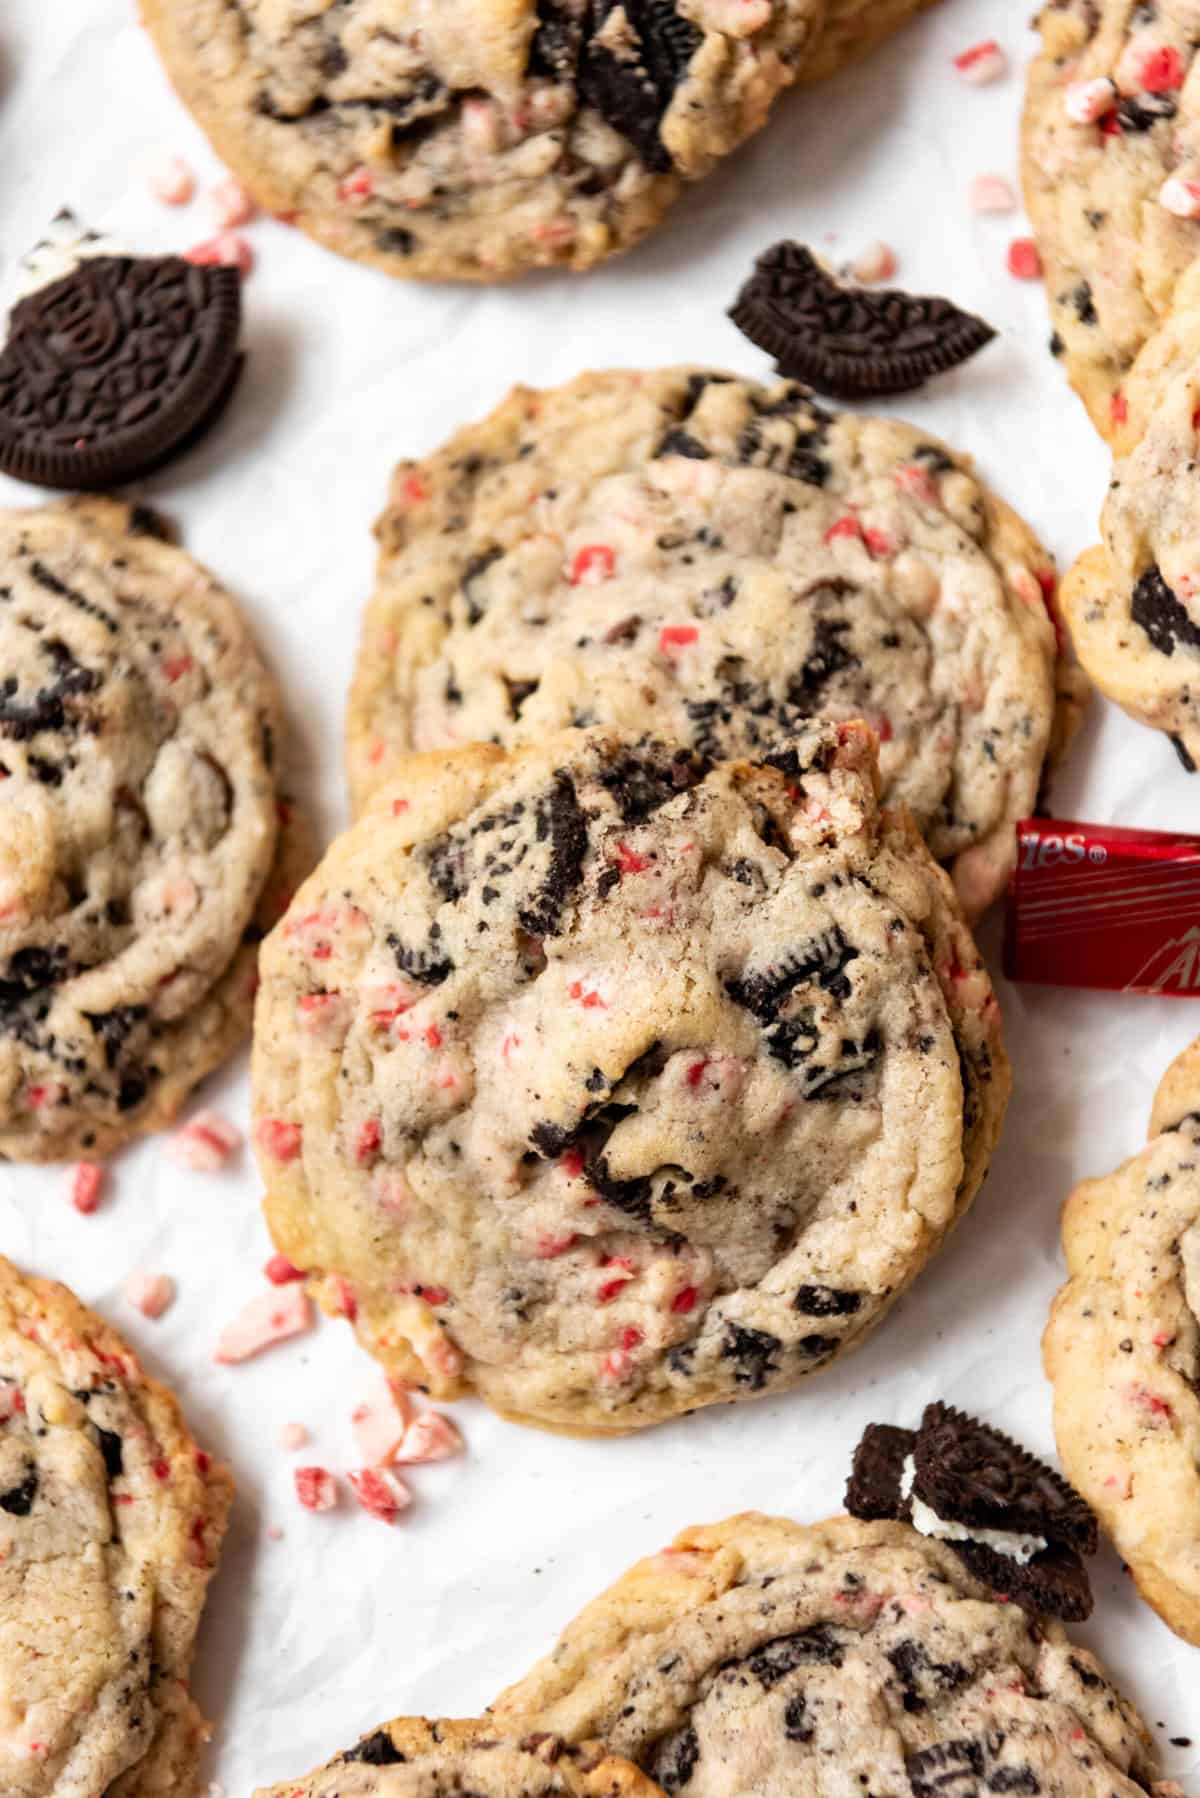 Oreo peppermint cookies overlapping each other with scattered peppermint candy around them.